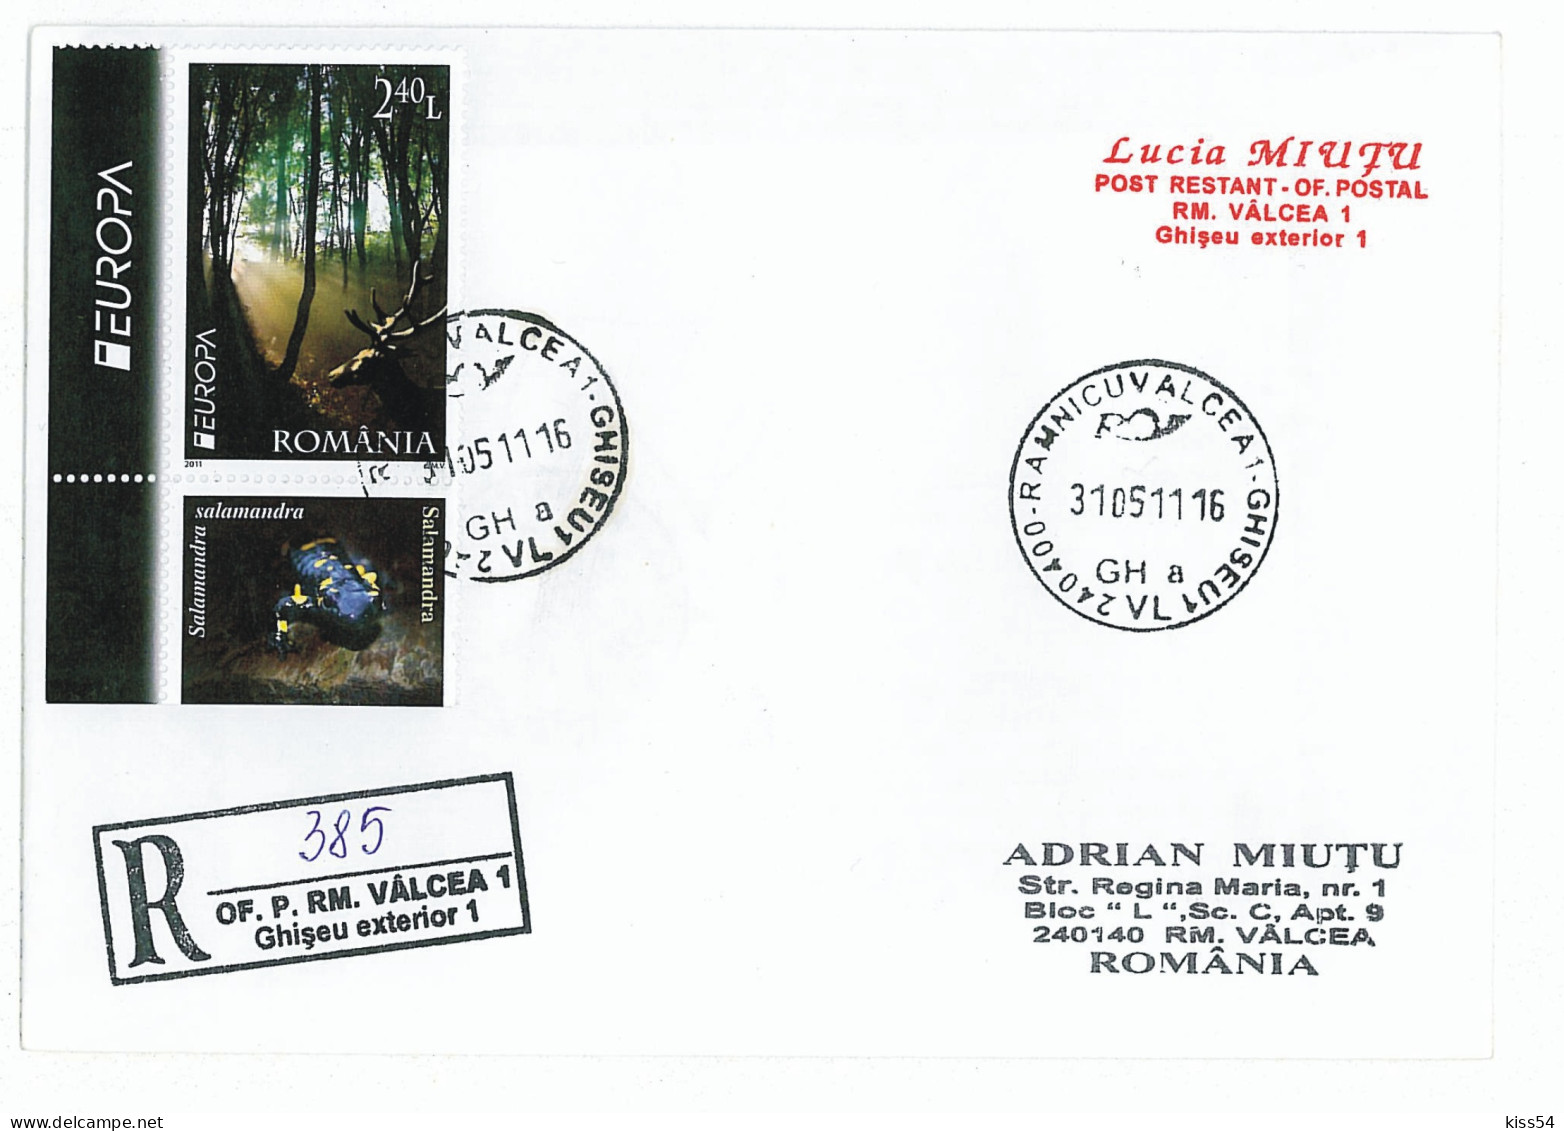 NCP 30 - 385-a EUROPA CEPT, Forest And BUCK, Romania - Registered, Stamp With TABS - 2011 - 2011